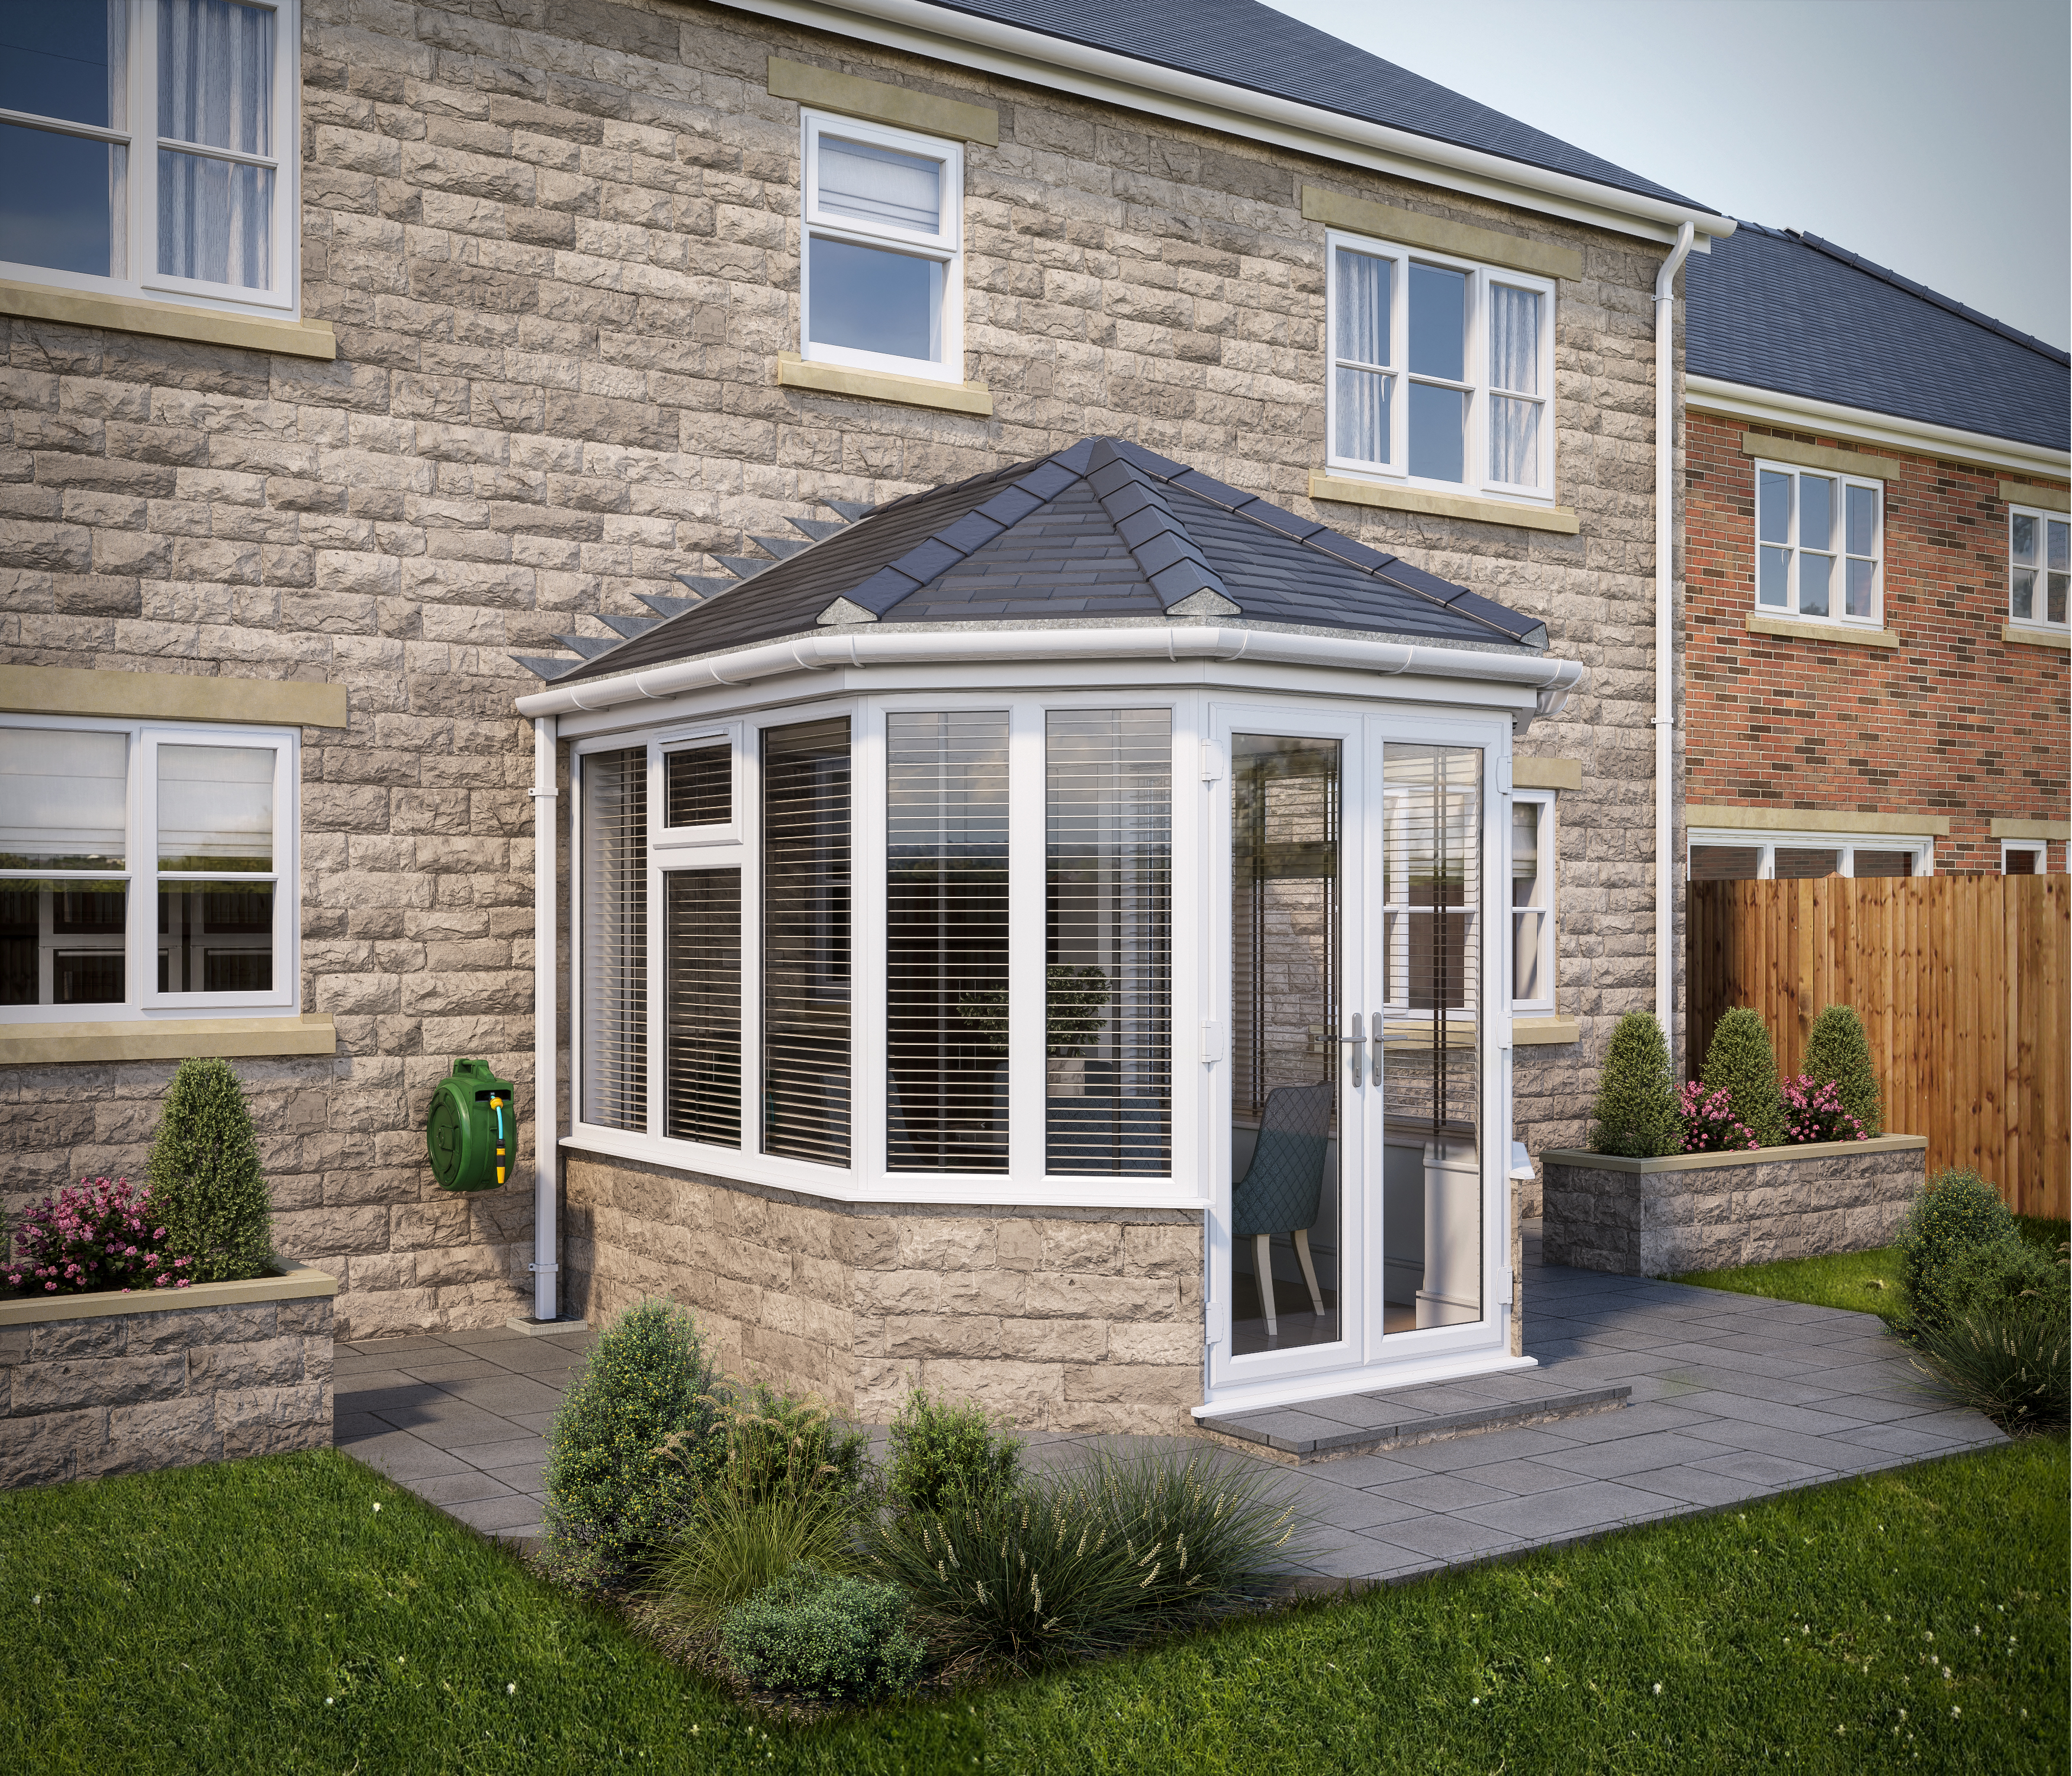 Image of SOLid Roof Victorian Conservatory White Frames Dwarf Wall with Titanium Grey Tiles - 13 x 10ft